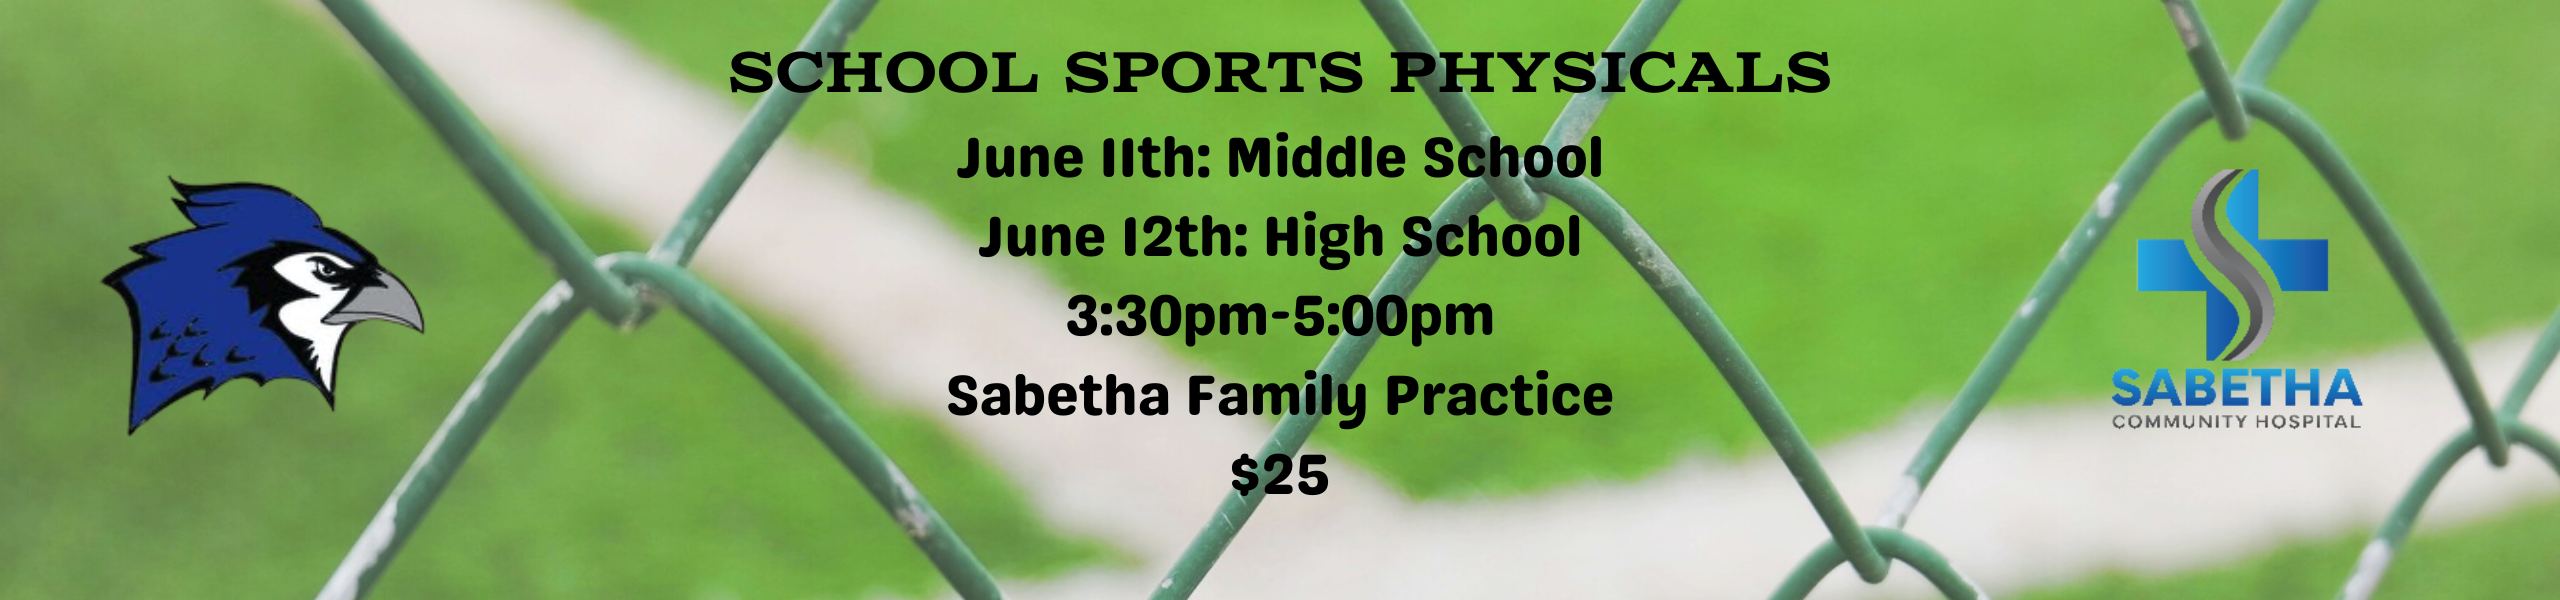 School Sports Physicals
June 11th Middle School
June 12th High School
3:30pm-5:00pm
Sabetha Family Practice
$25